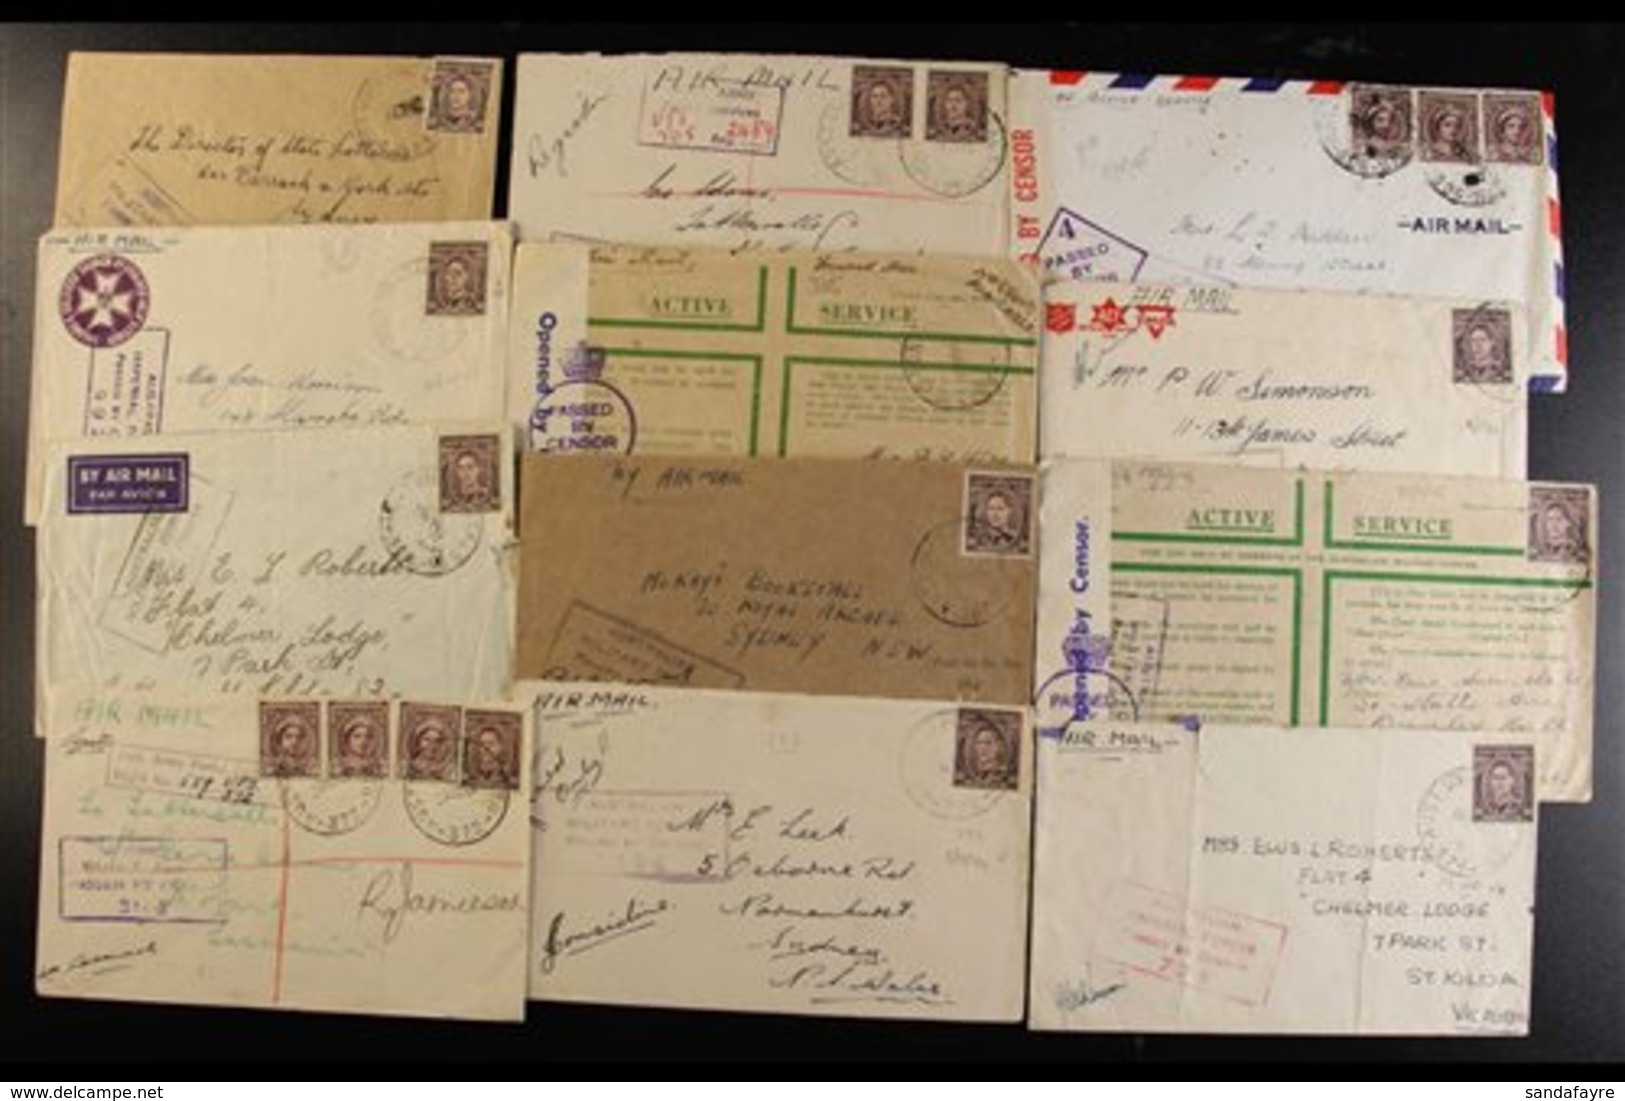 WW2 AUSTRALIAN FORCES - AUST UNIT POSTAL STN DATESTAMPS A Fine Collection Of Covers Back To Australia, Or One To NZ, Bea - Papouasie-Nouvelle-Guinée